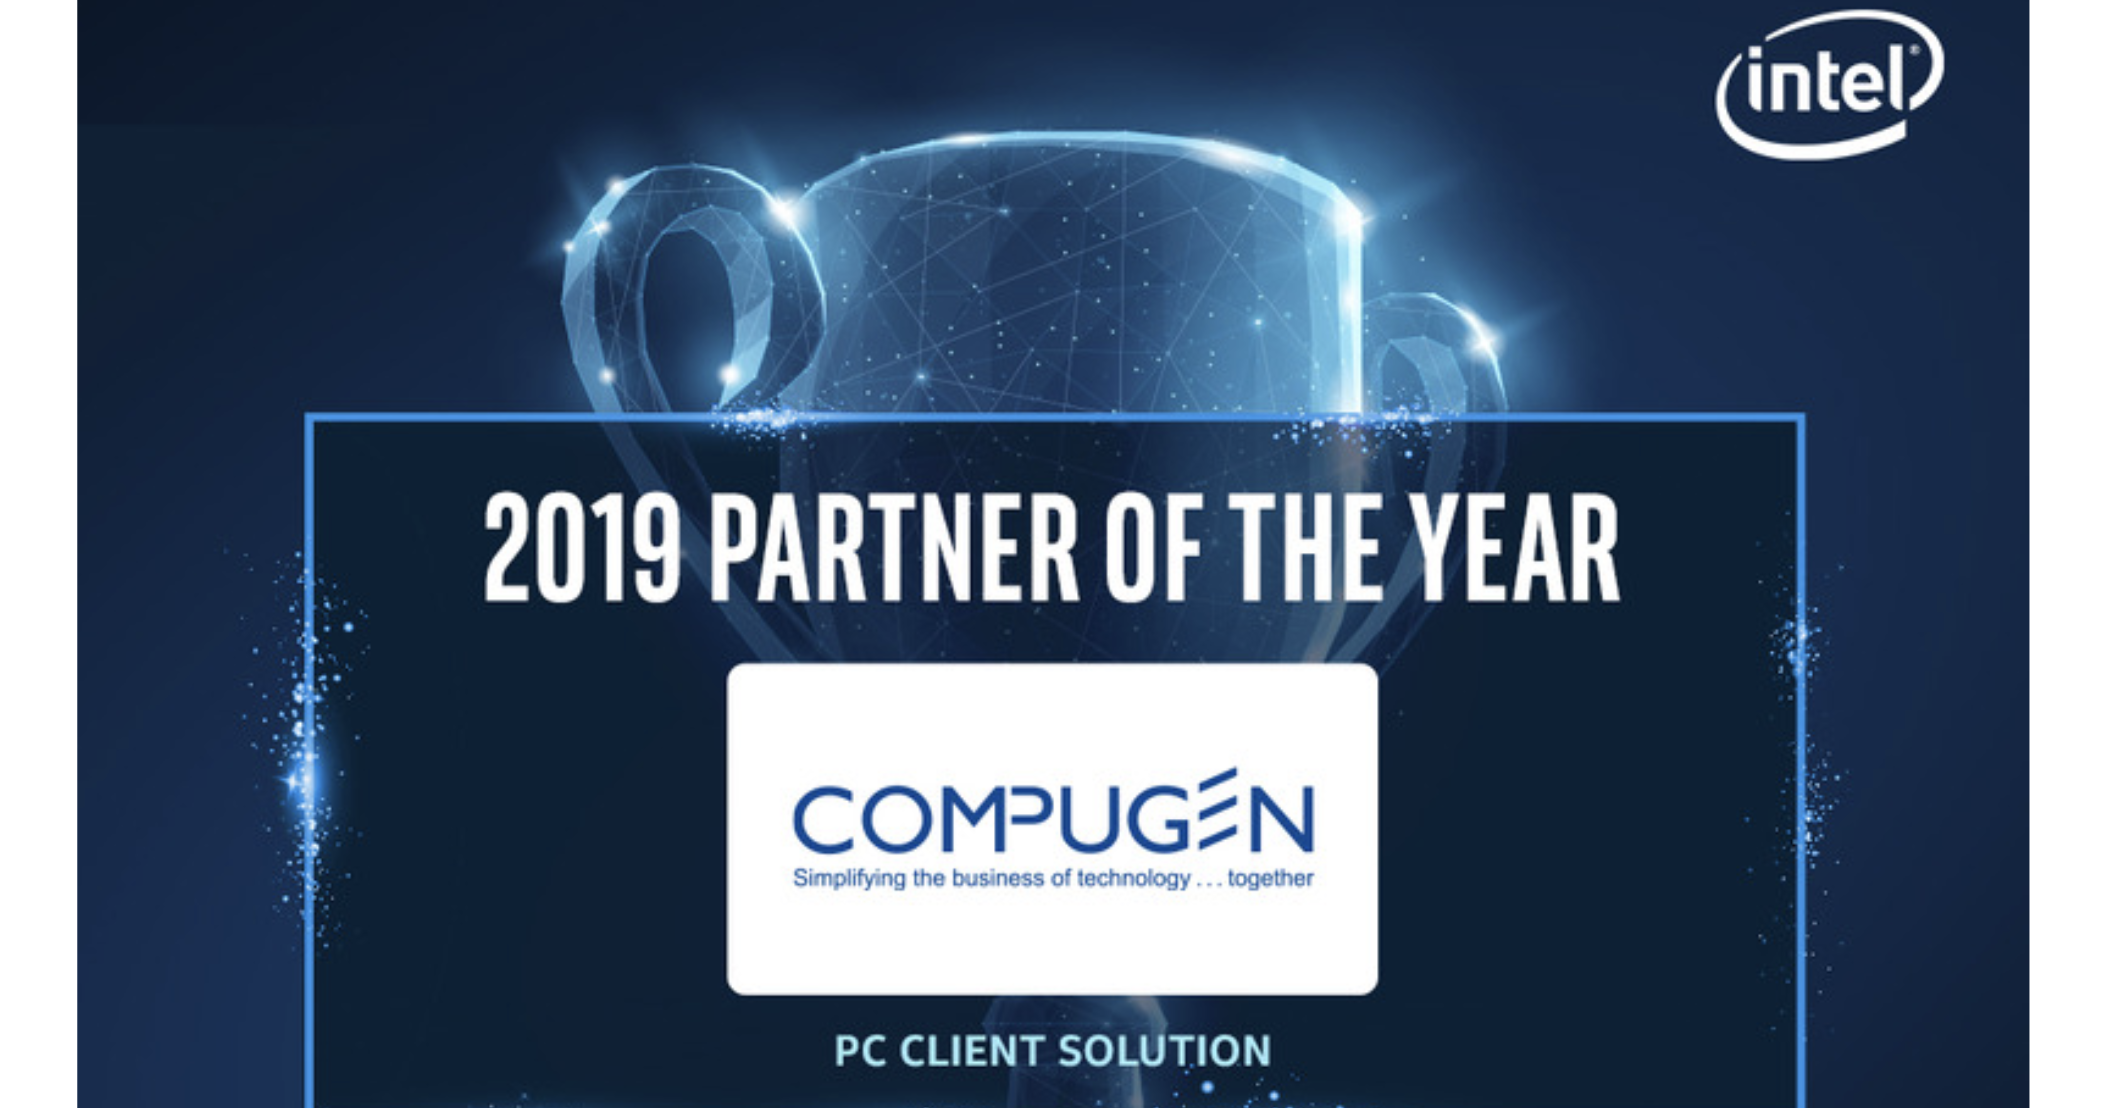 Compugen Awarded Intel 2019 Partner of the Year: PC Client Solution